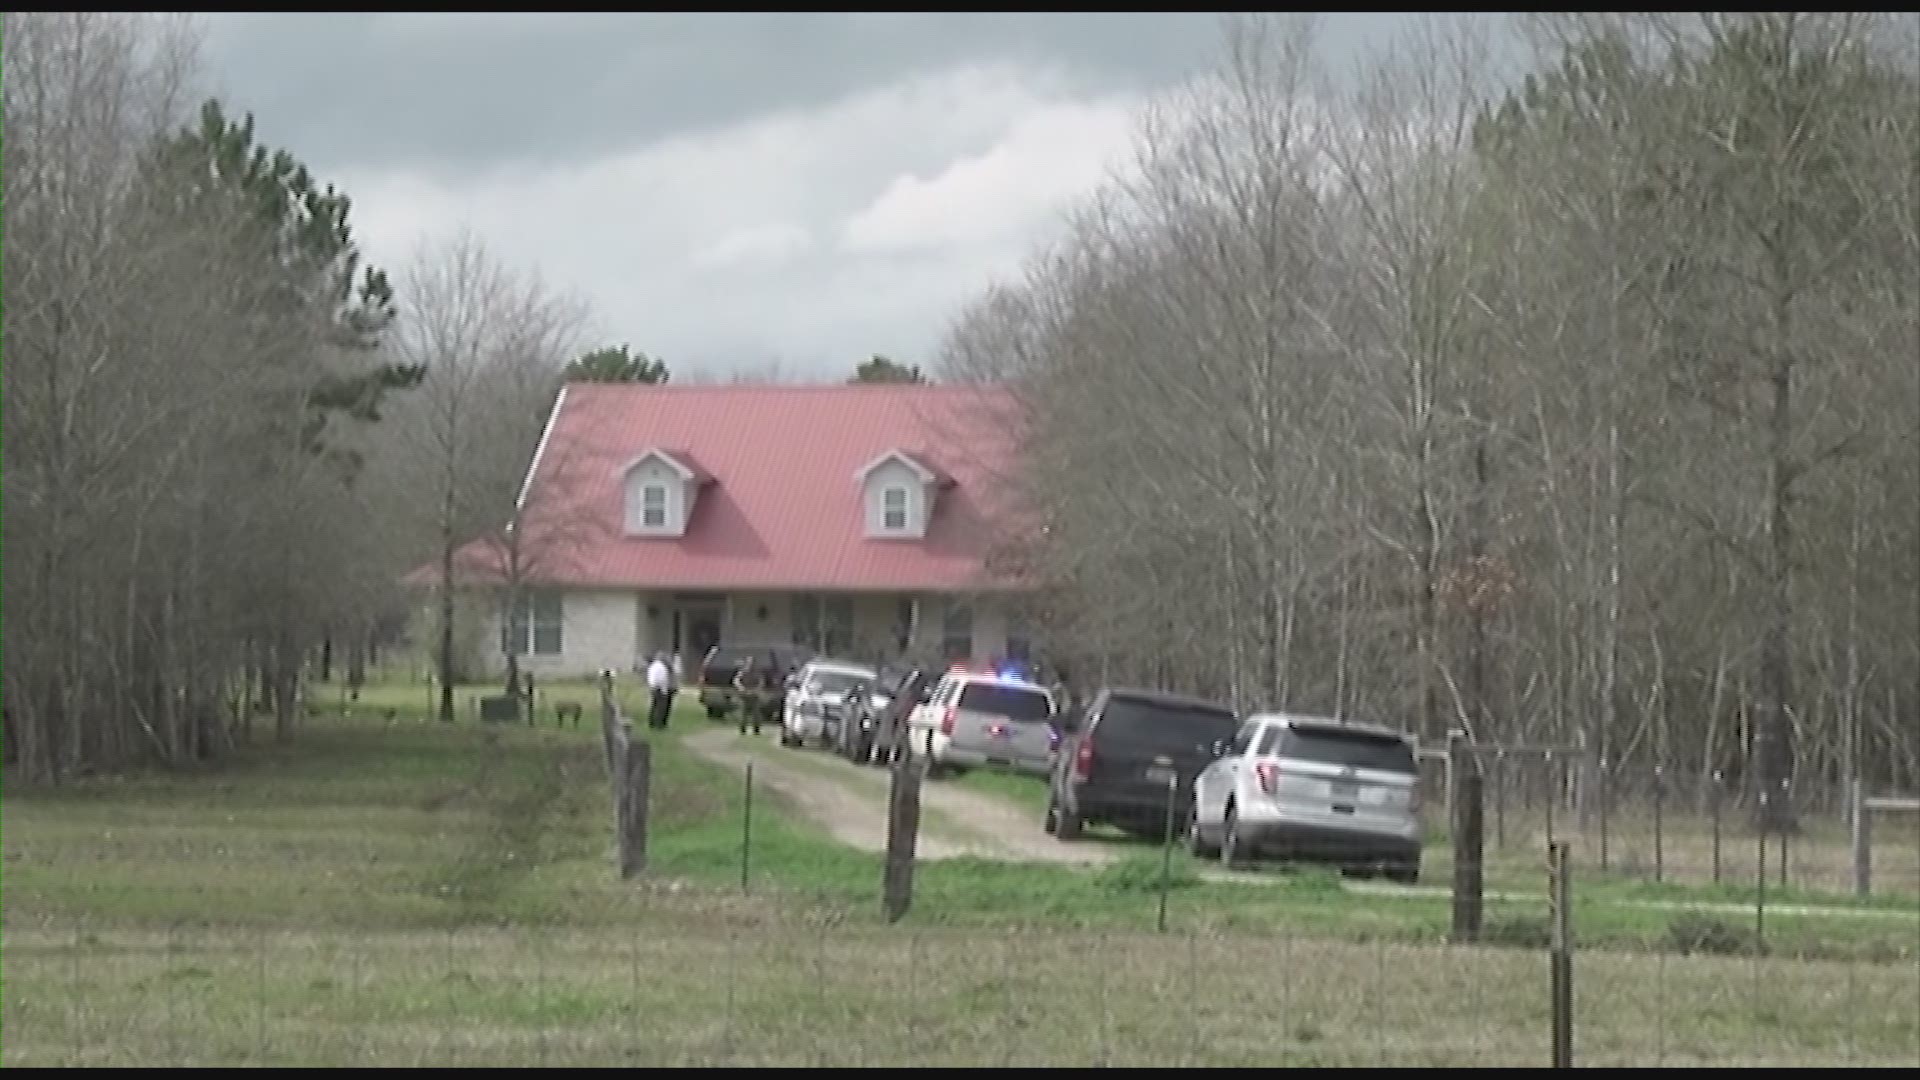 Five people were found dead inside a home in Polk County Monday morning. The county's sheriff's office said all five died from gunshot wounds.